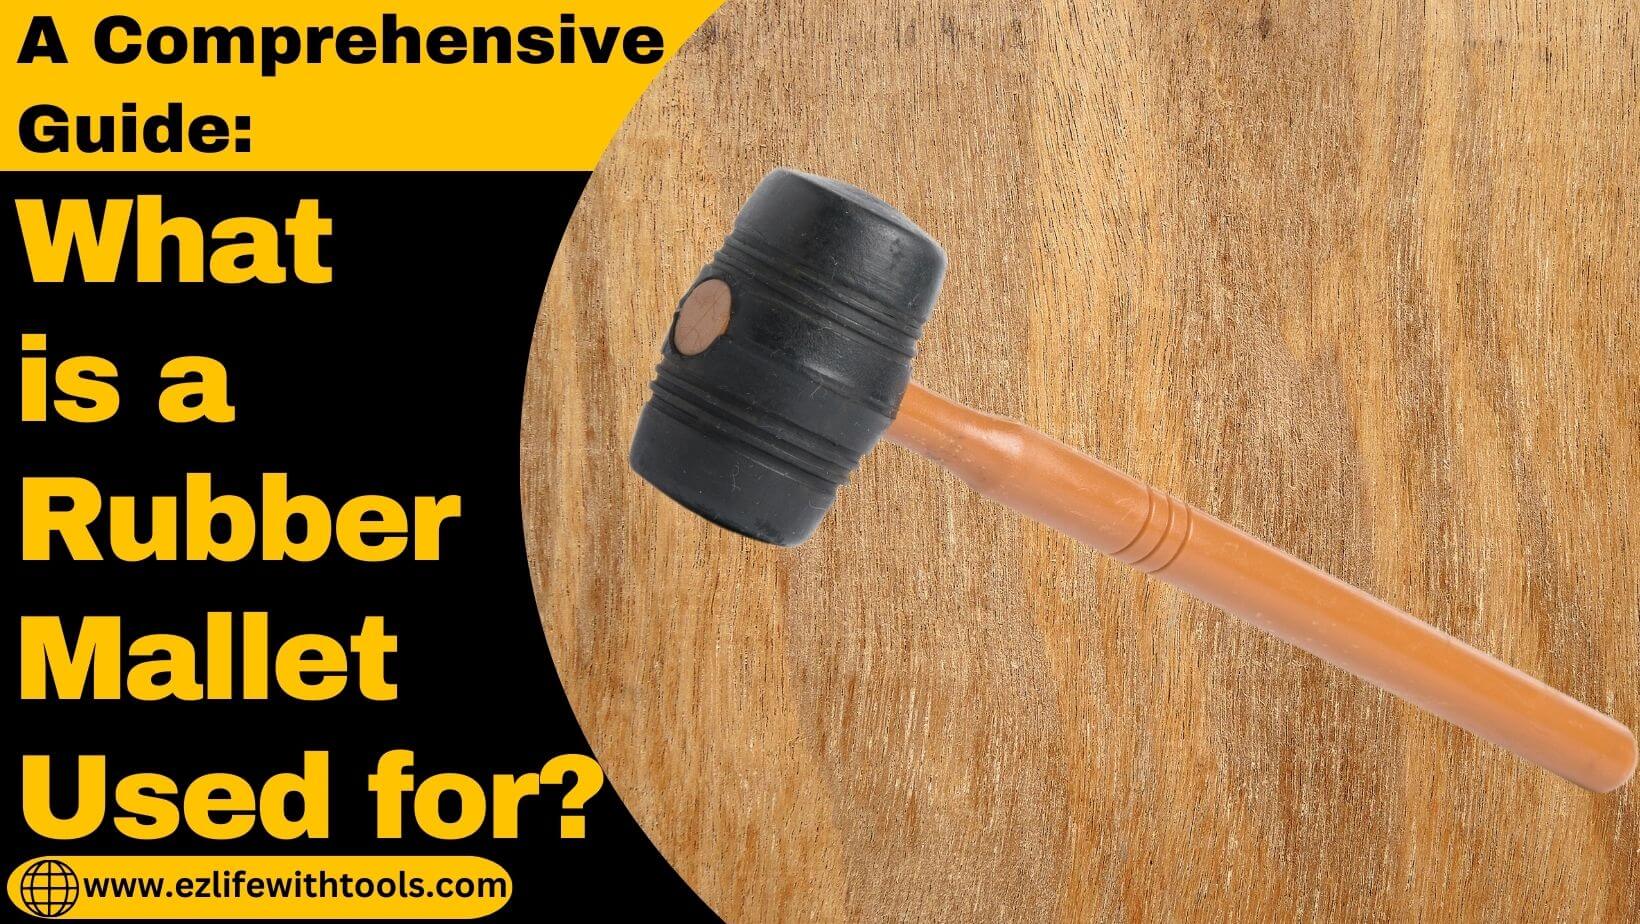 What is a Rubber Mallet Used for